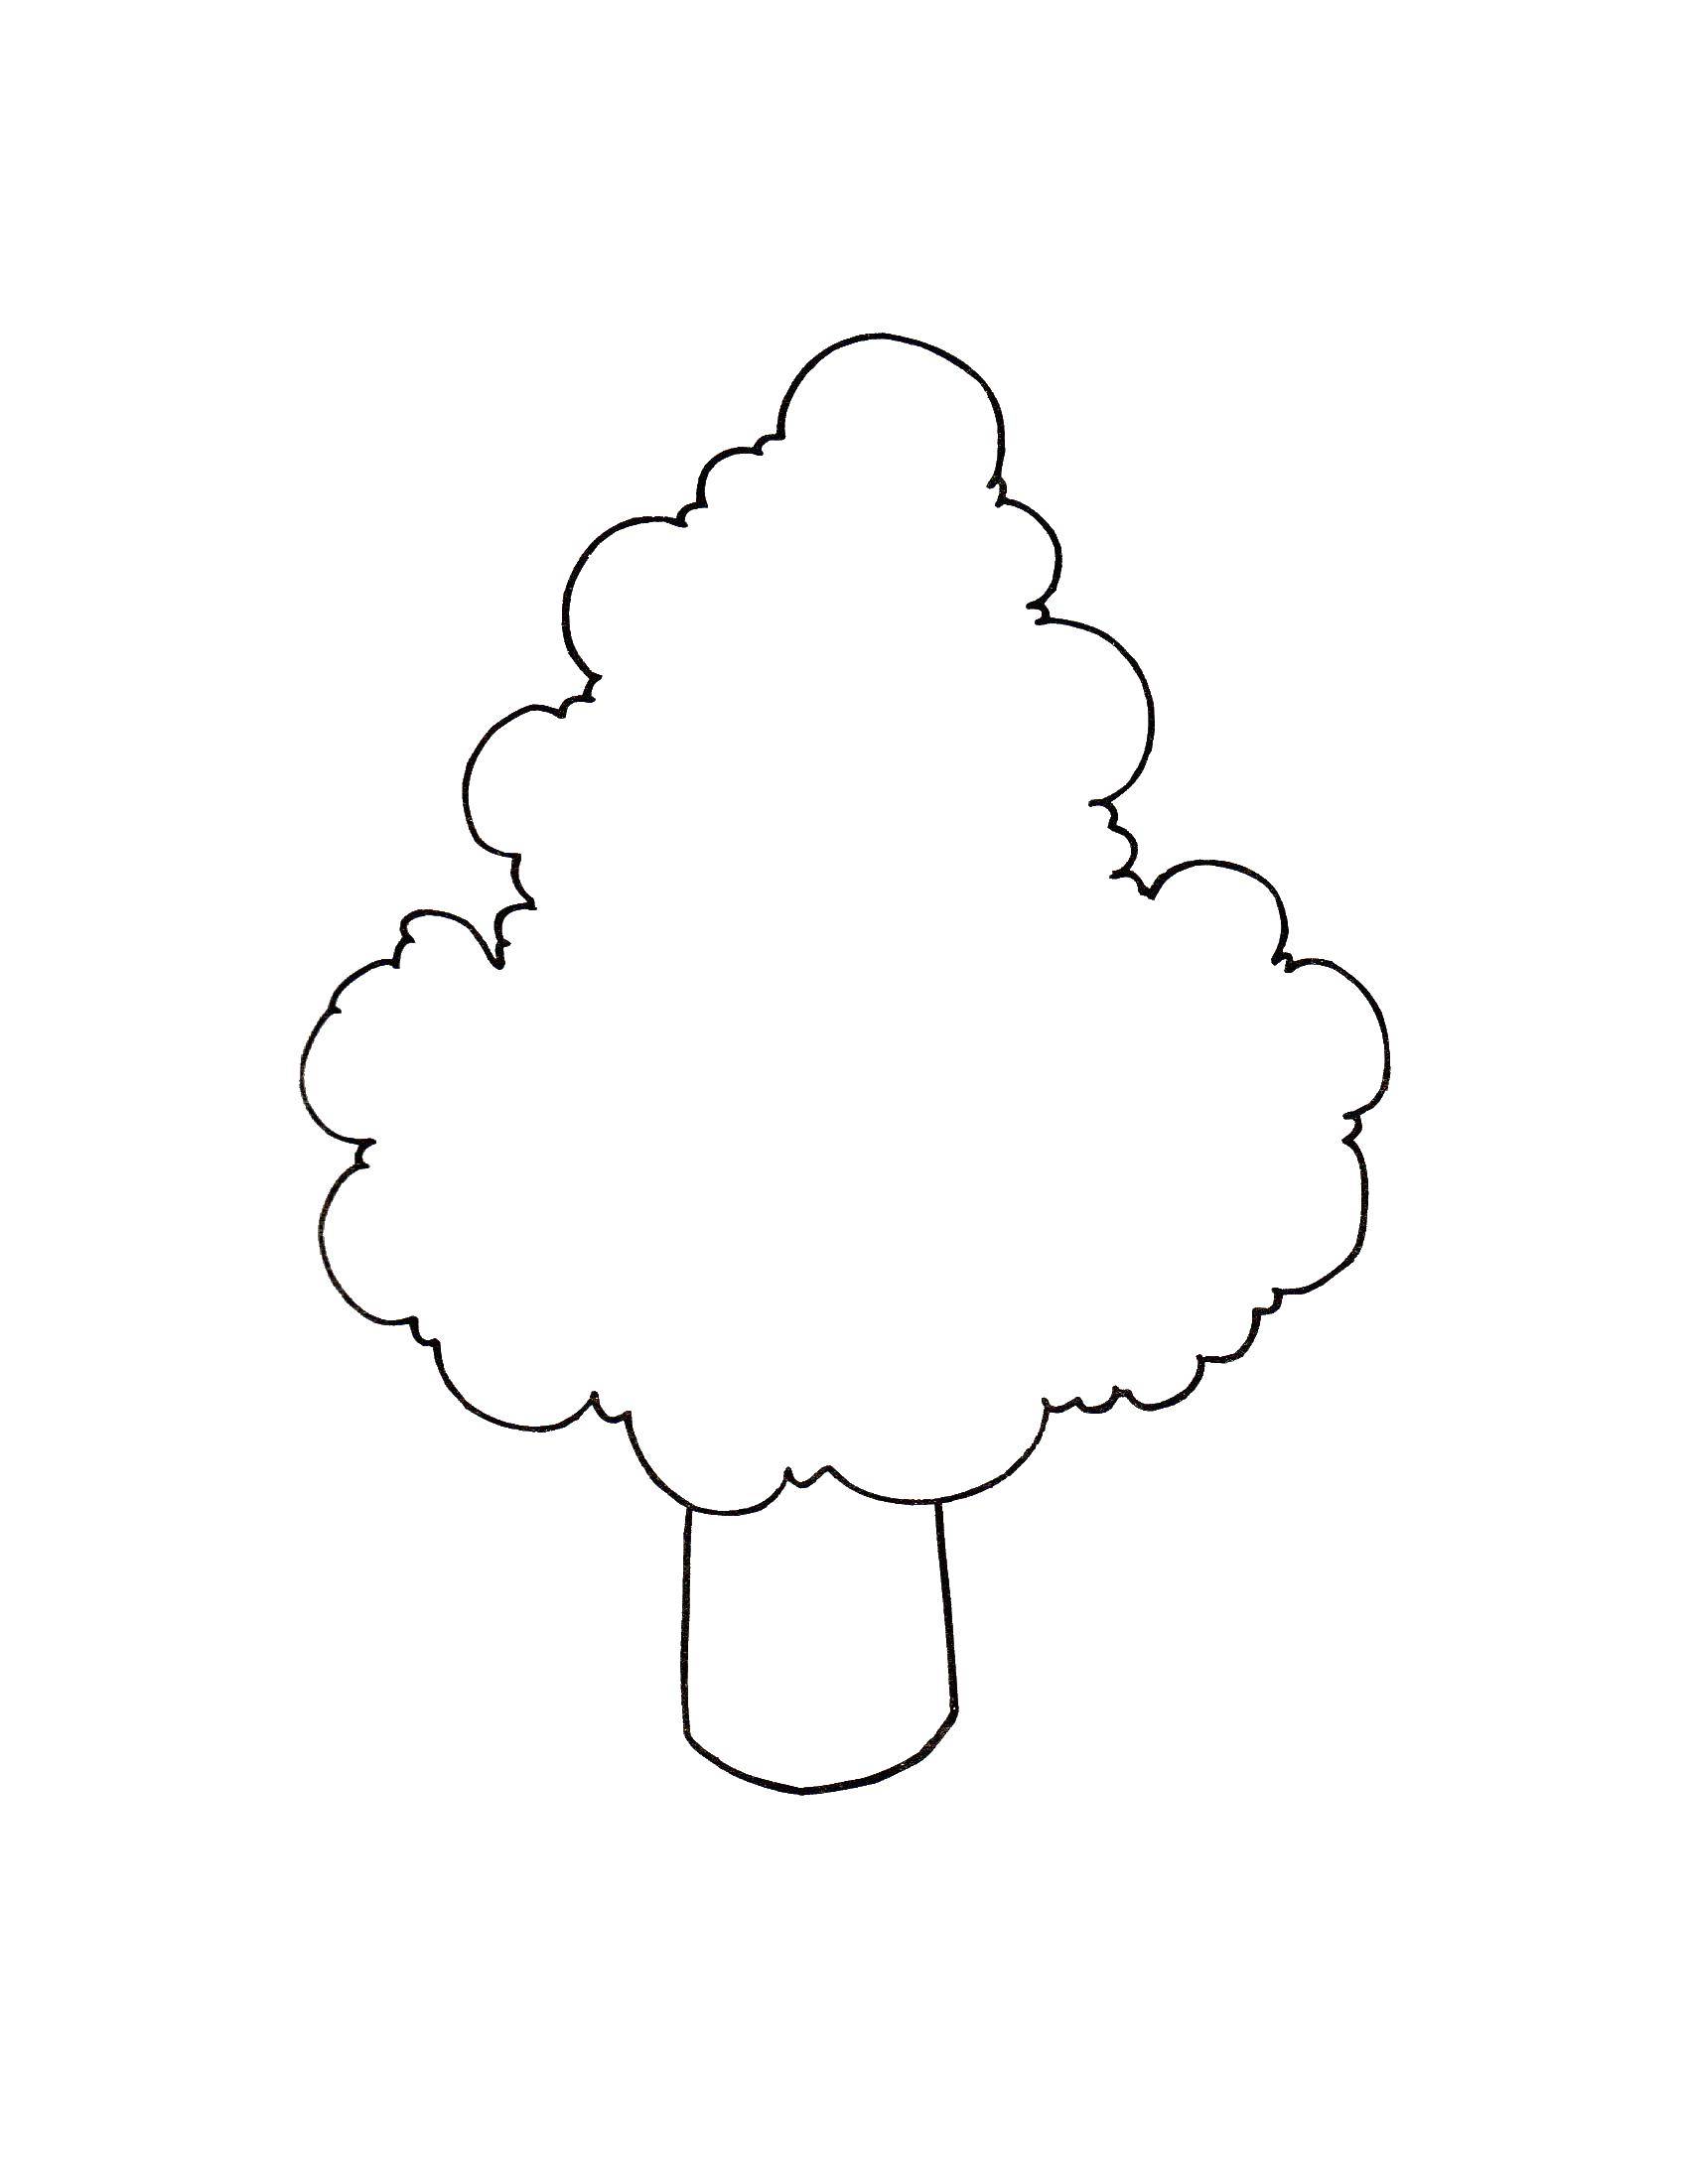 Coloring Tree. Category The plant. Tags:  plants, tree, nature.